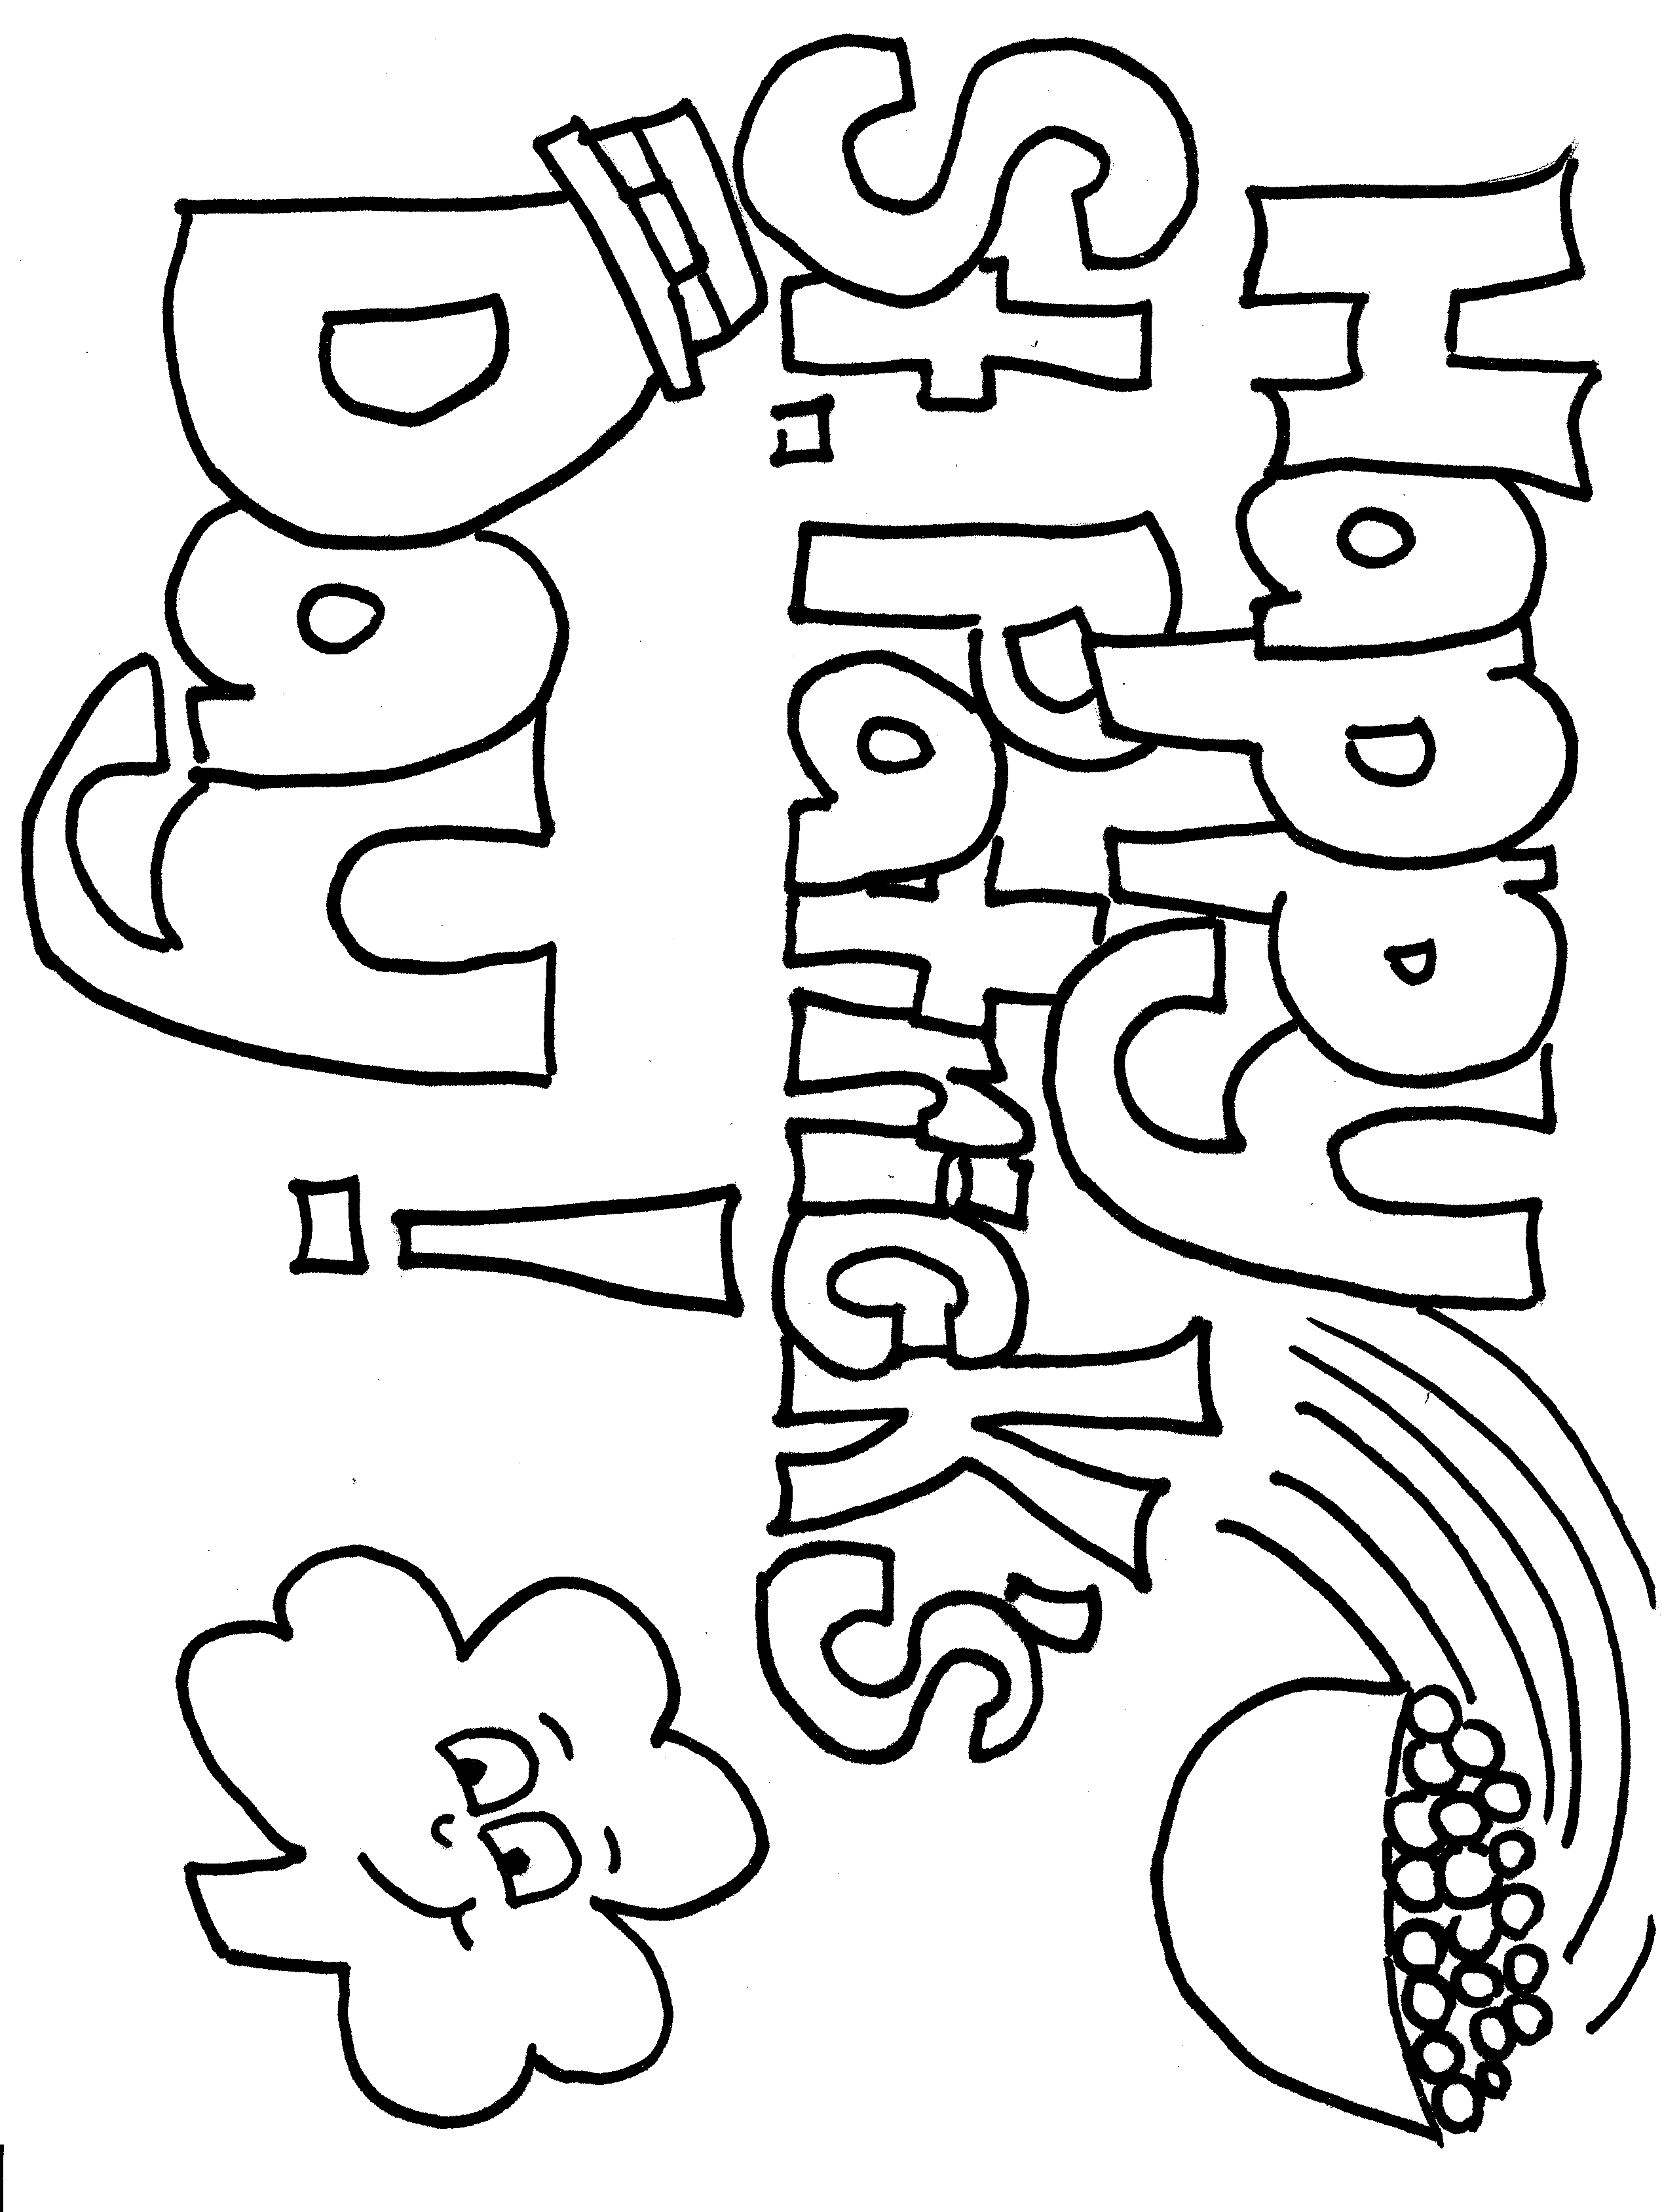 Happy St. Patrick's Day coloring page